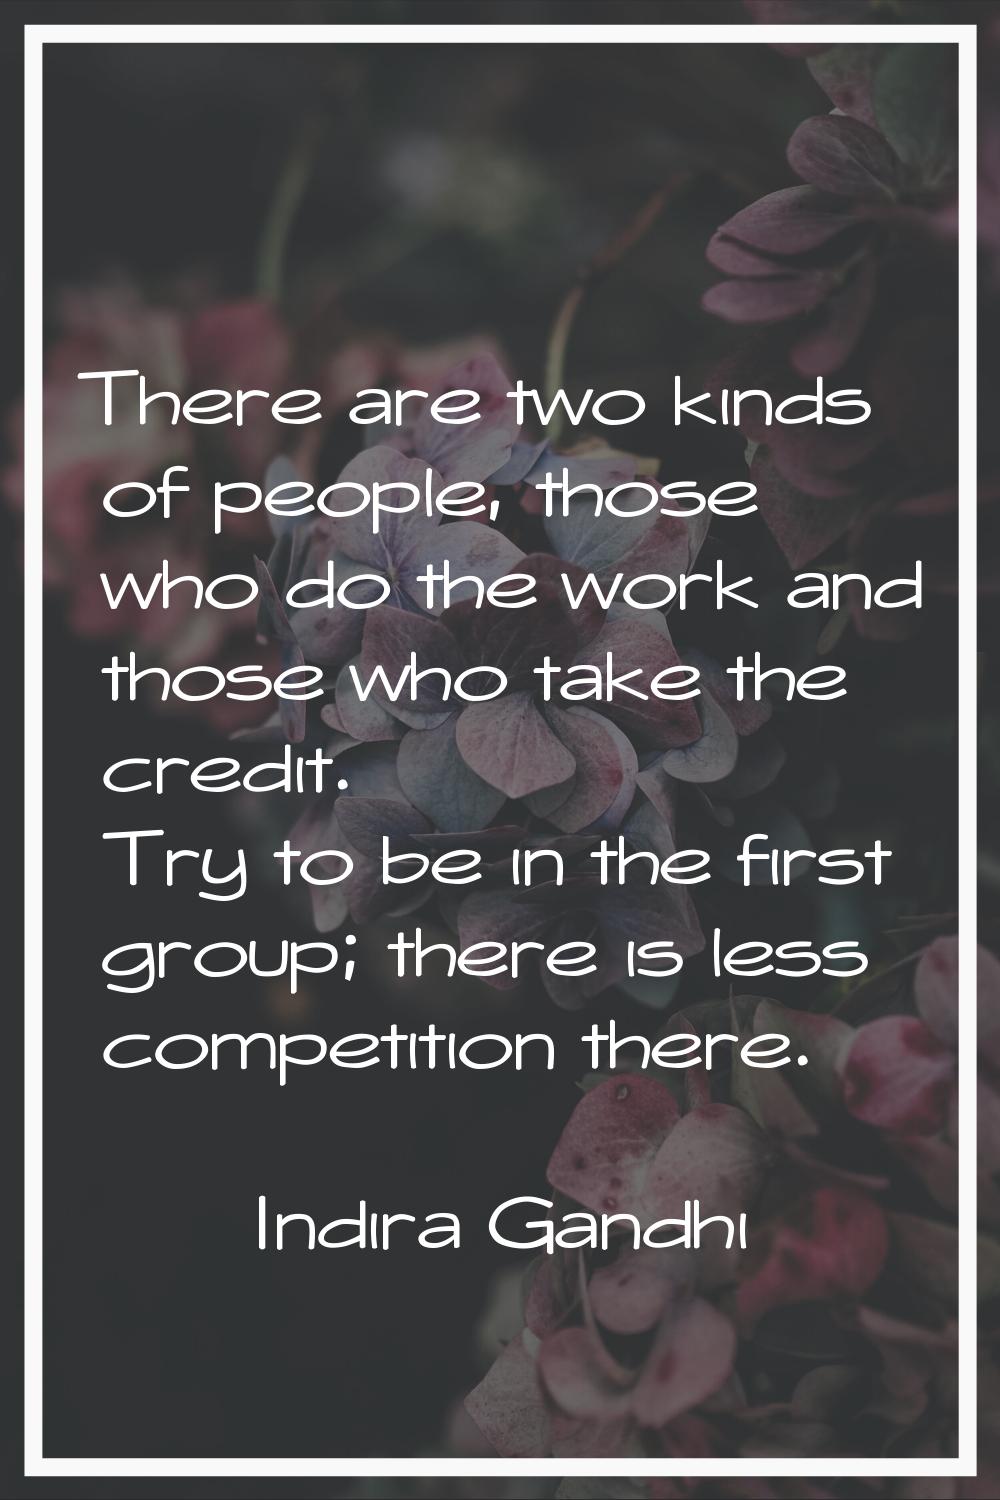 There are two kinds of people, those who do the work and those who take the credit. Try to be in th